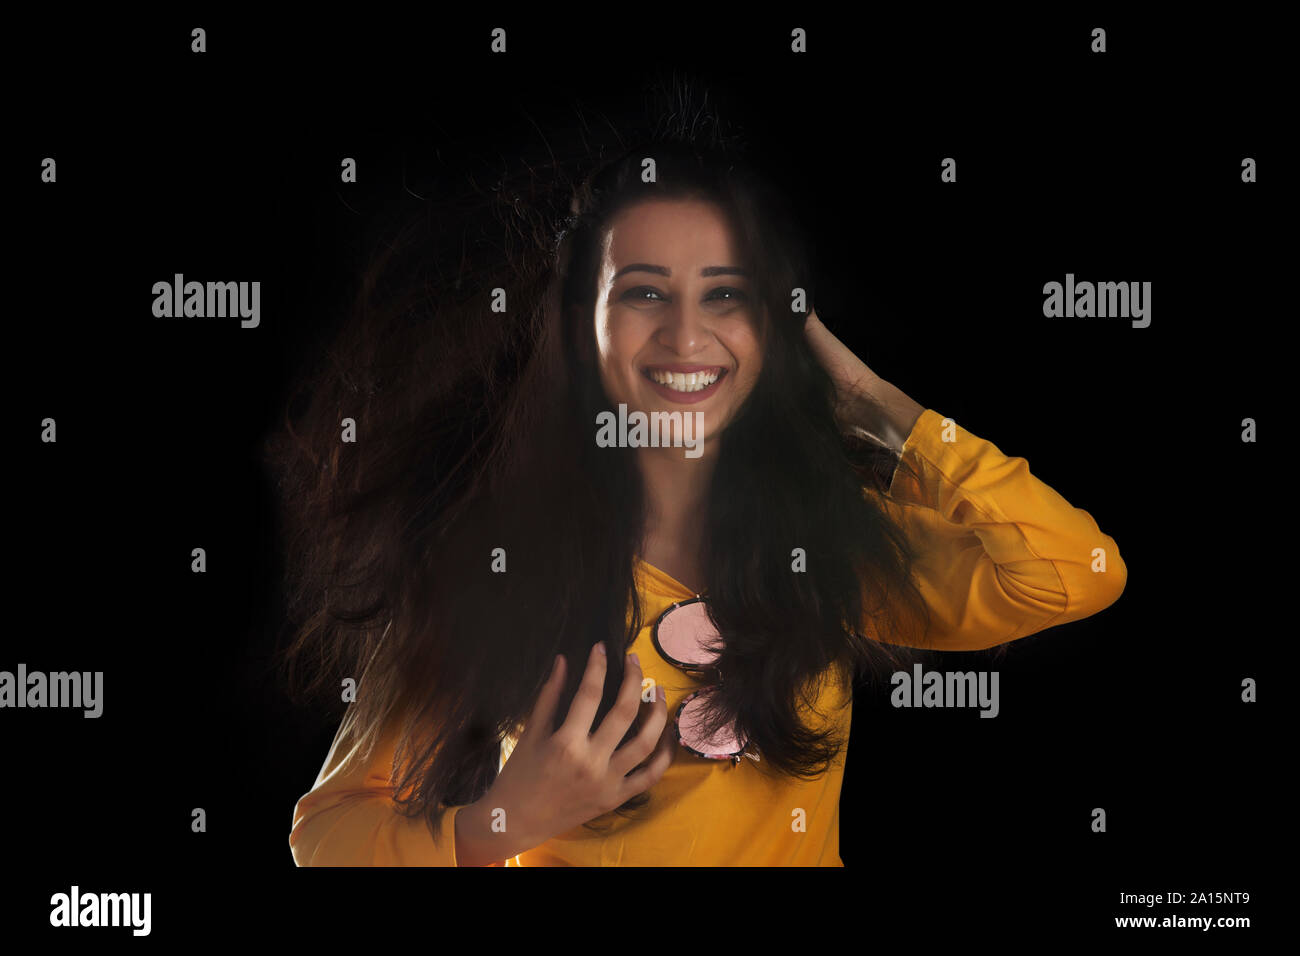 Portrait of smiling woman over black background Stock Photo